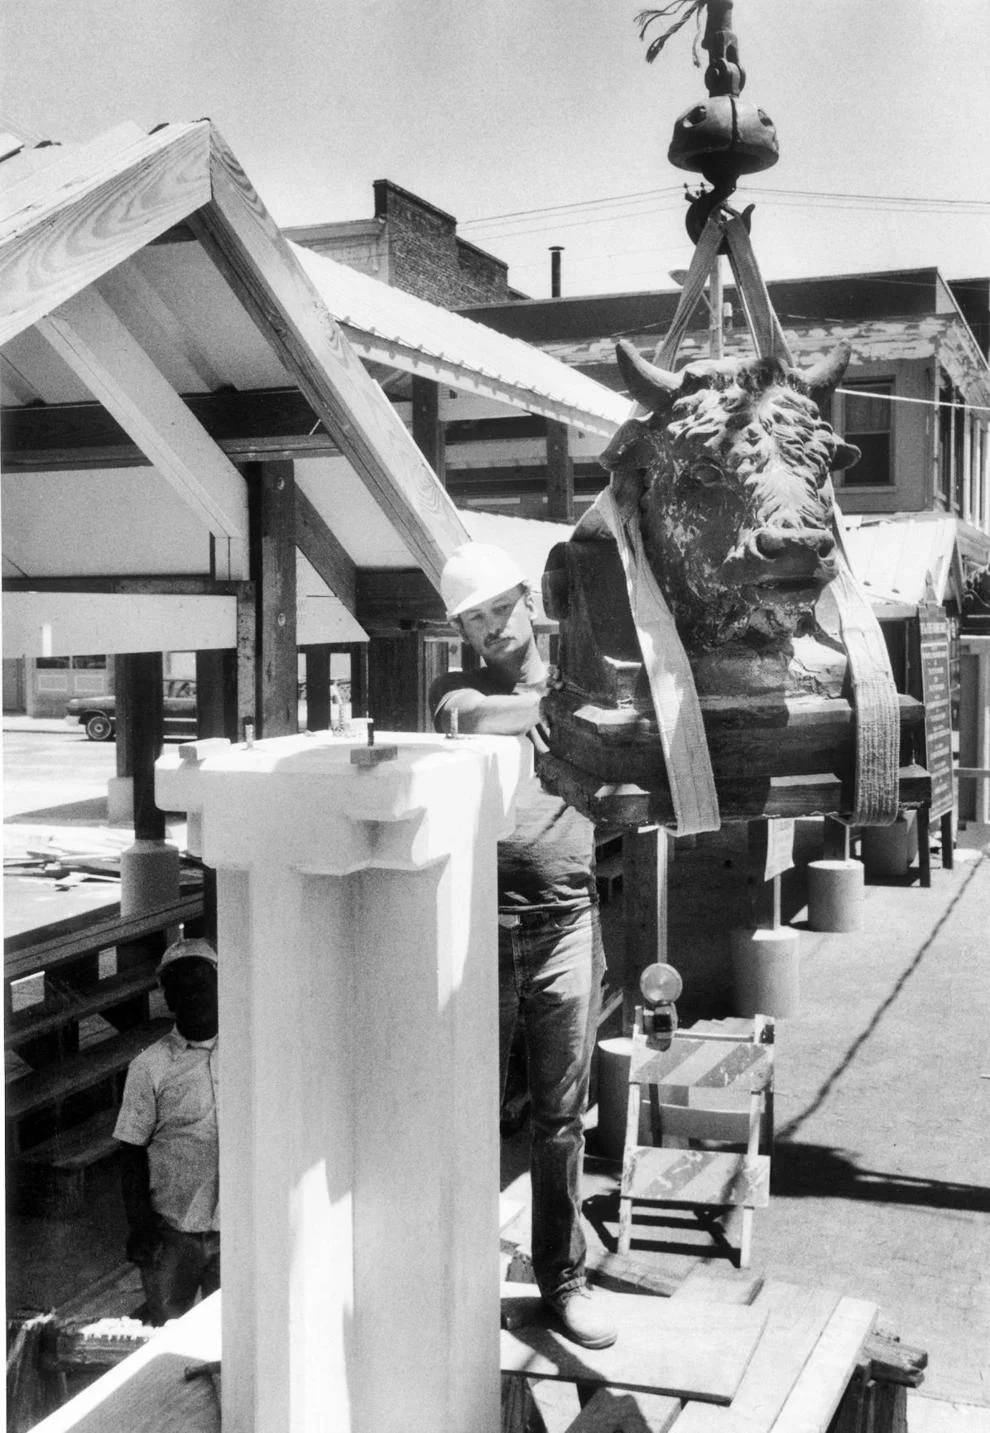 One of two surviving antique terra cotta bull’s heads was prepared for mounting by Ron Kingery at the 17th Street Farmers’ Market in Richmond, 1966.